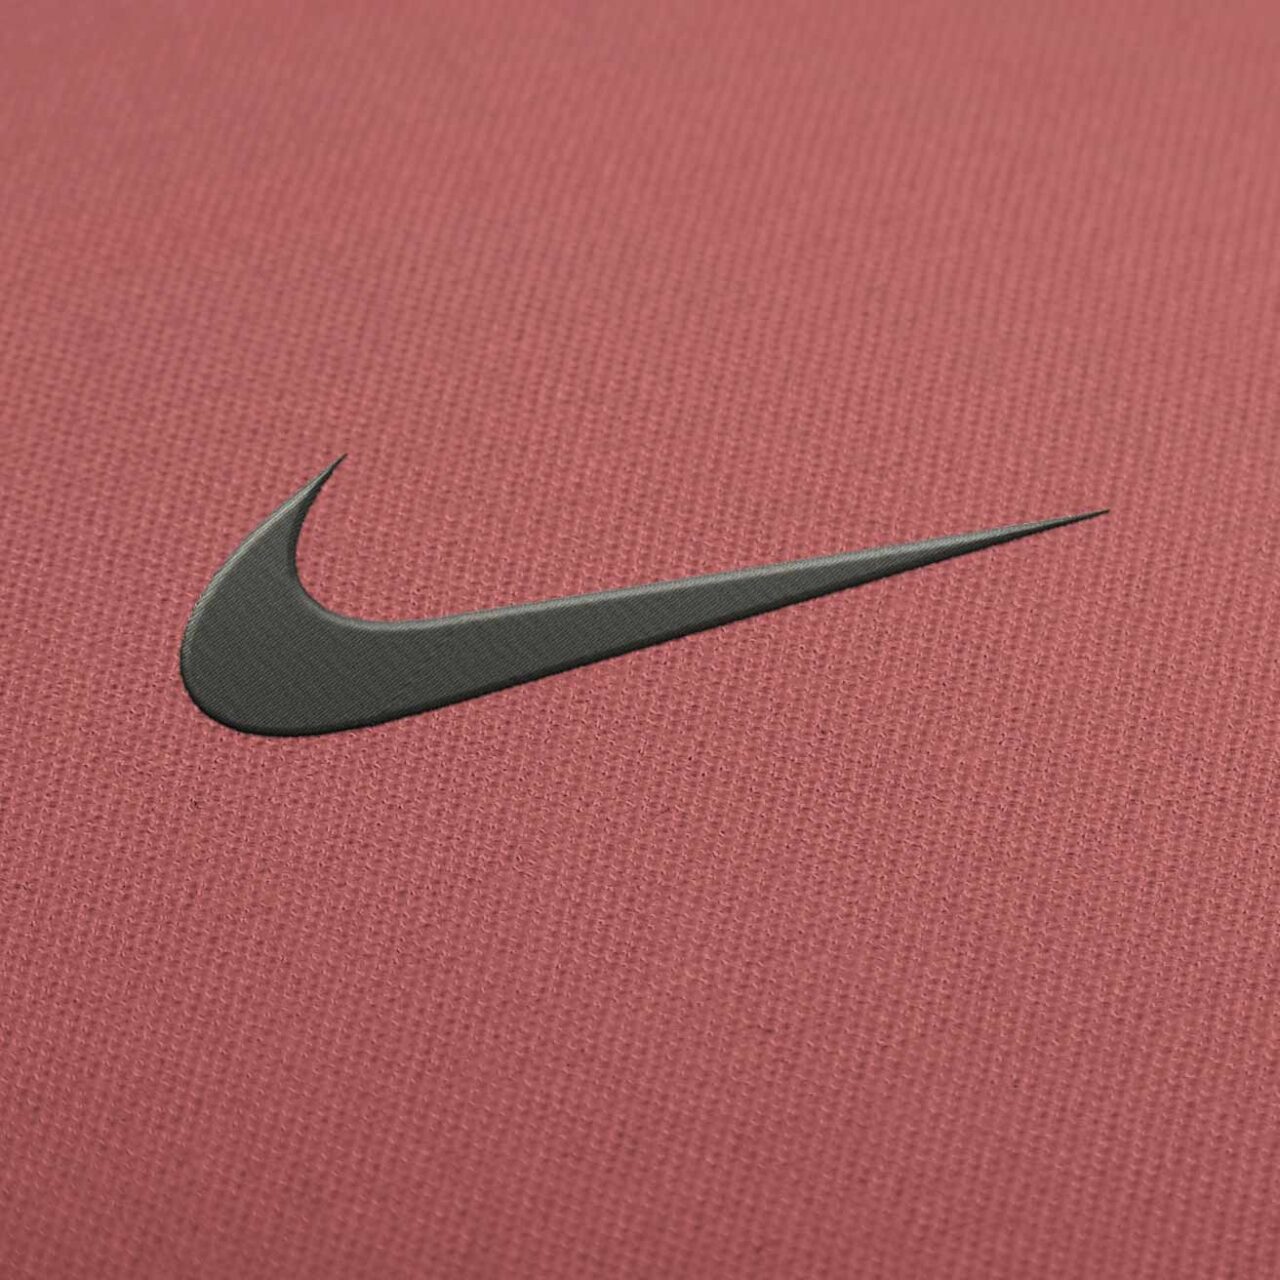 Nike Swoosh Logo Embroidery Design Download - EmbroideryDownload